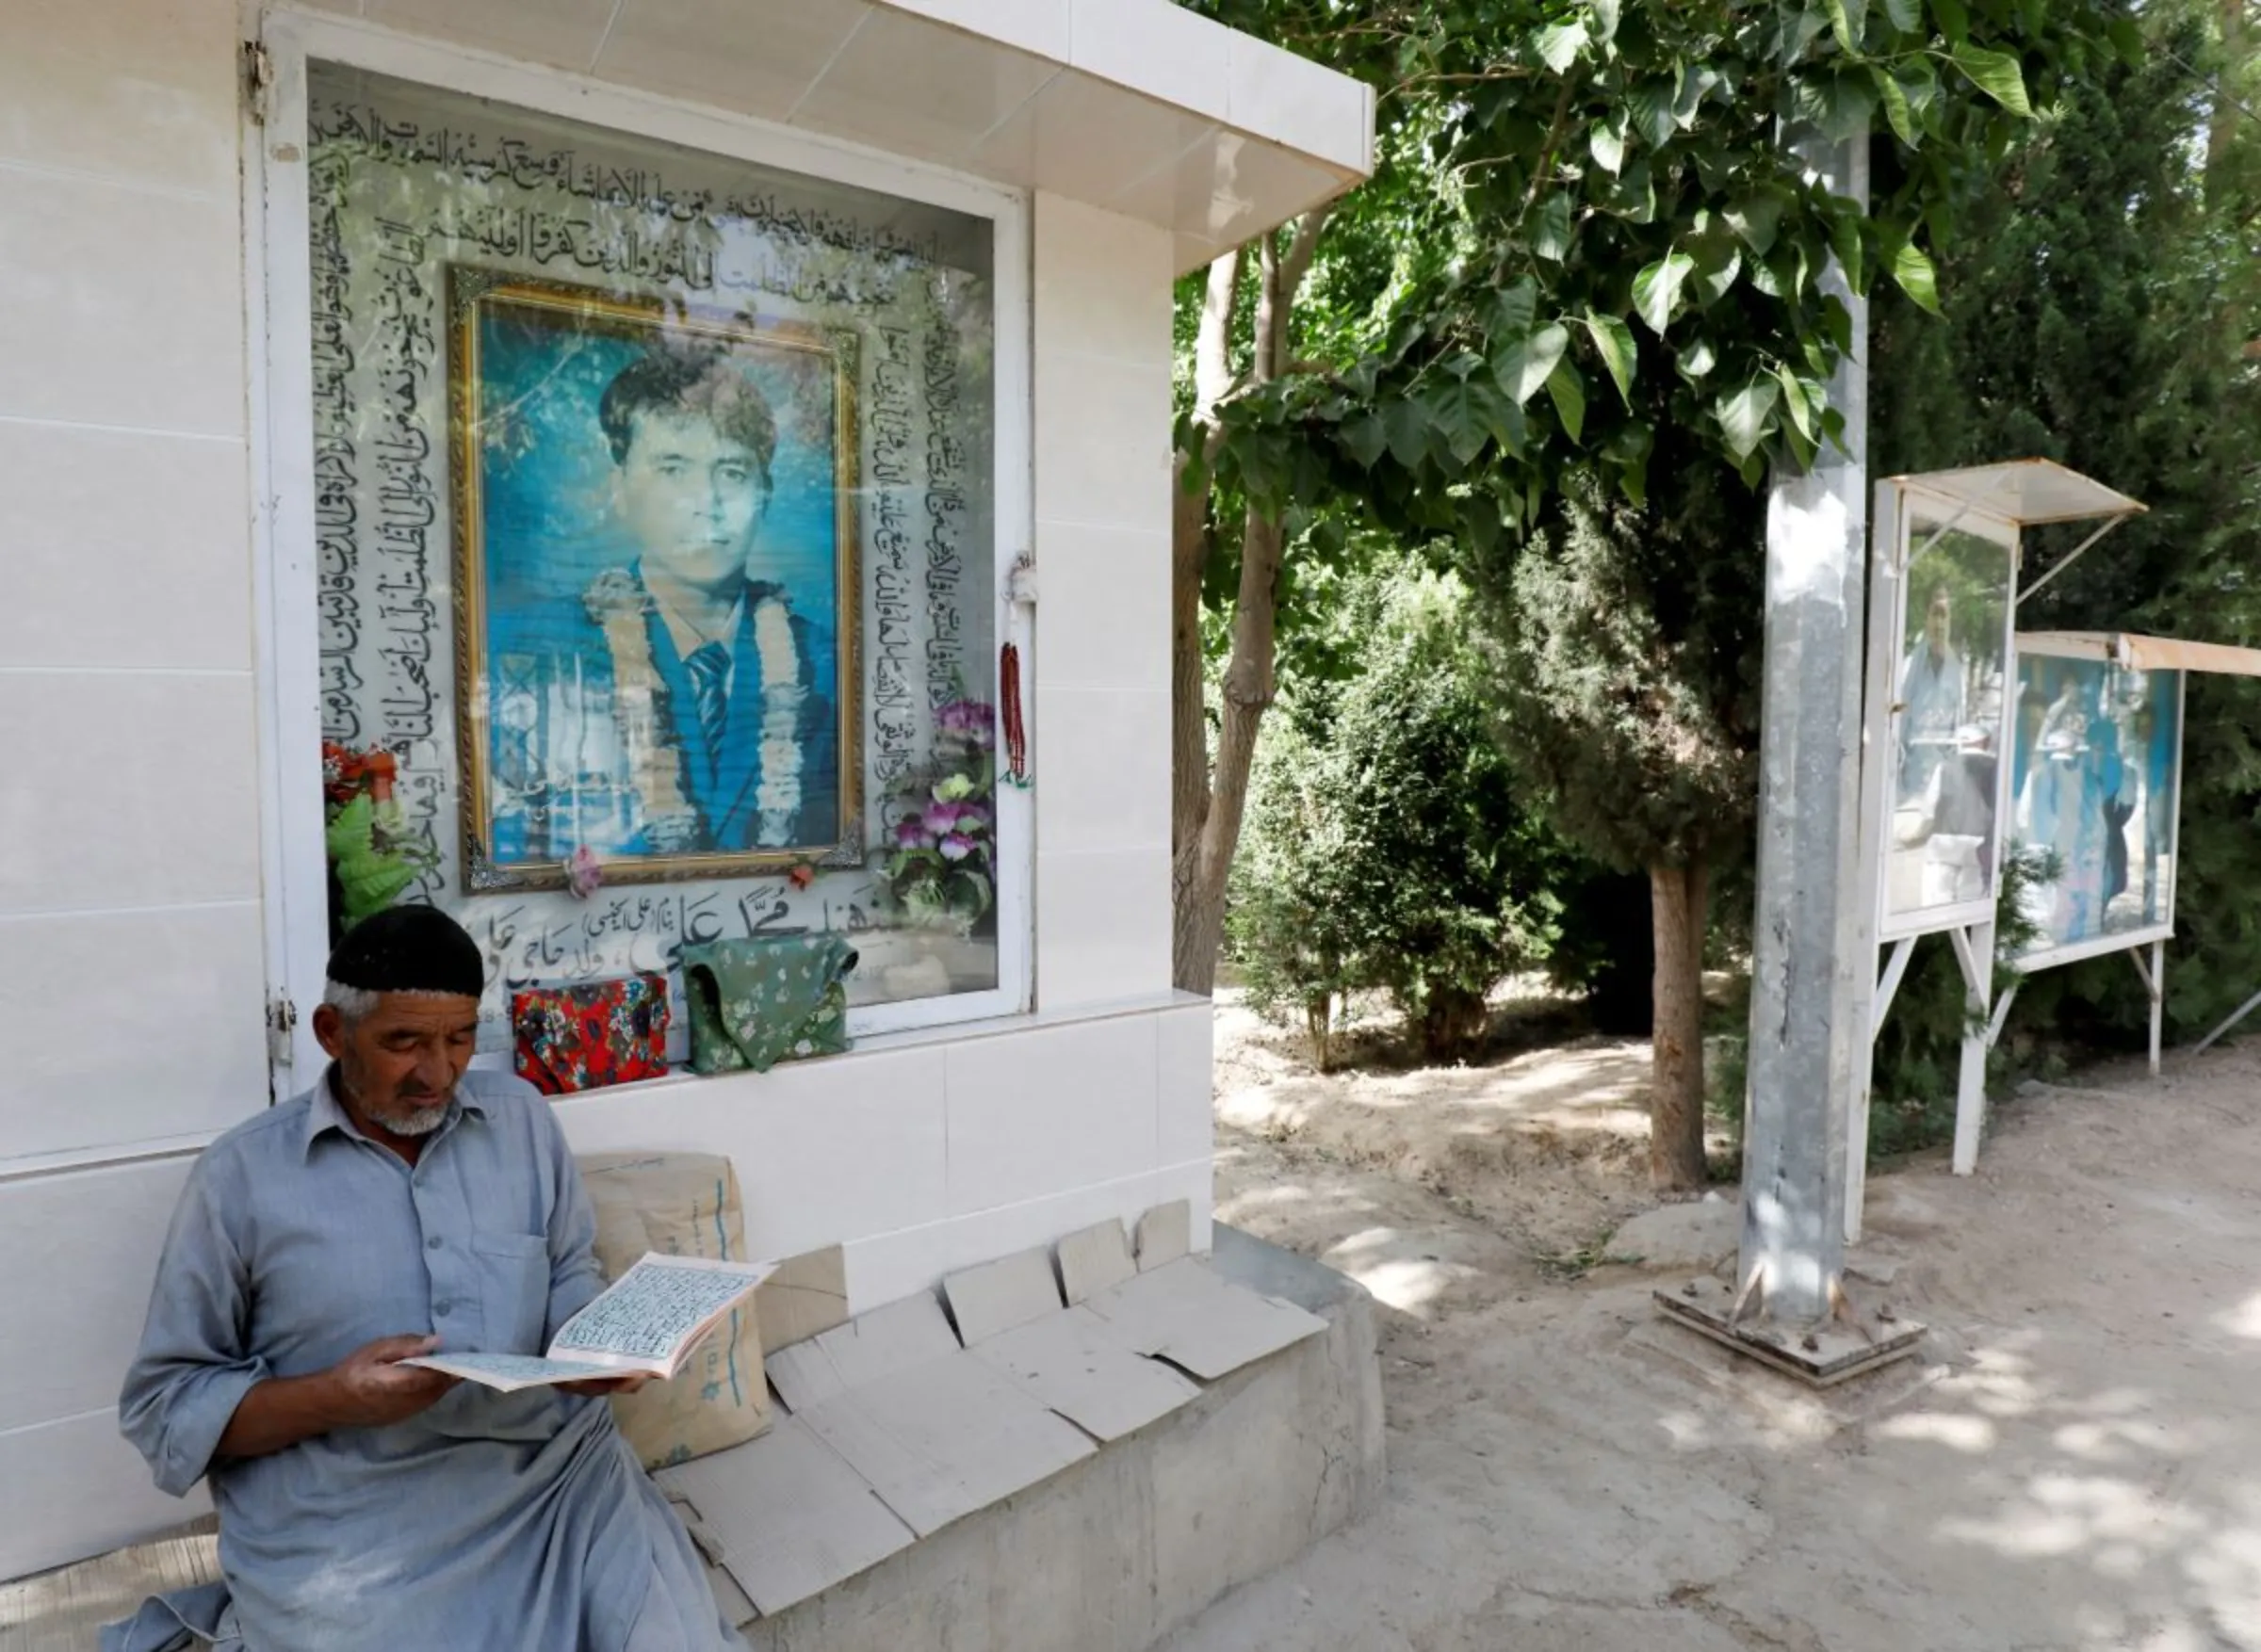 A Hazara man reads the Koran along a passageway with photos of deceased victims who lost their lives during target killings and bomb attacks, at the graveyard called Shuhda Qabristan (martyred graveyard) in Mariabad, Quetta, Pakistan, June 13, 2019. REUTERS/Akhtar Soomro